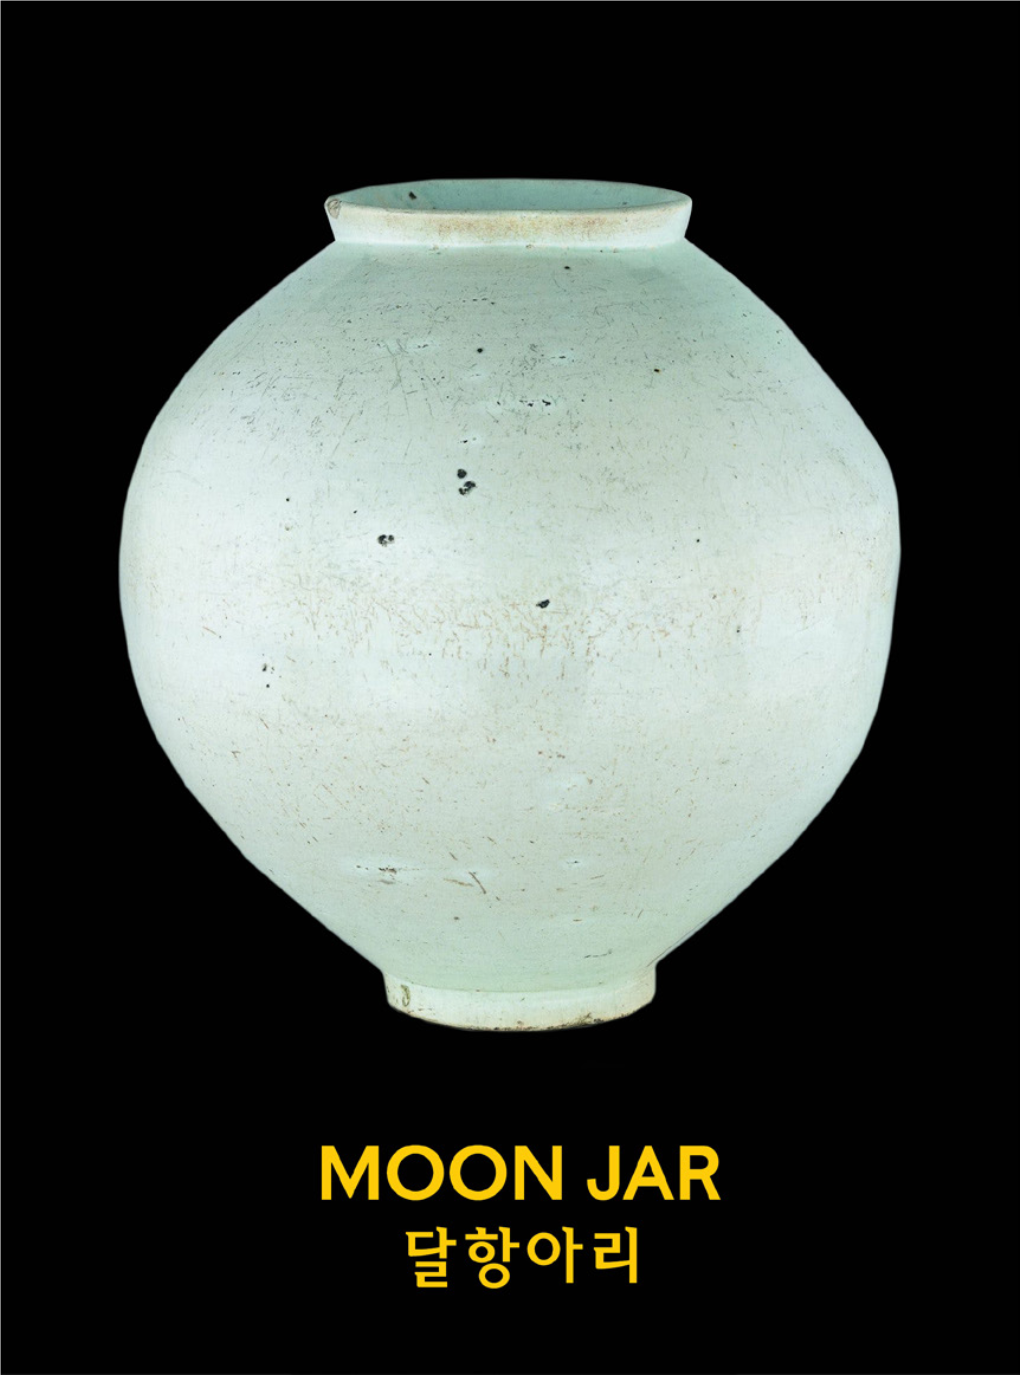 Moon Jar: Contemporary Economic Growth and the Prosperity of Our People